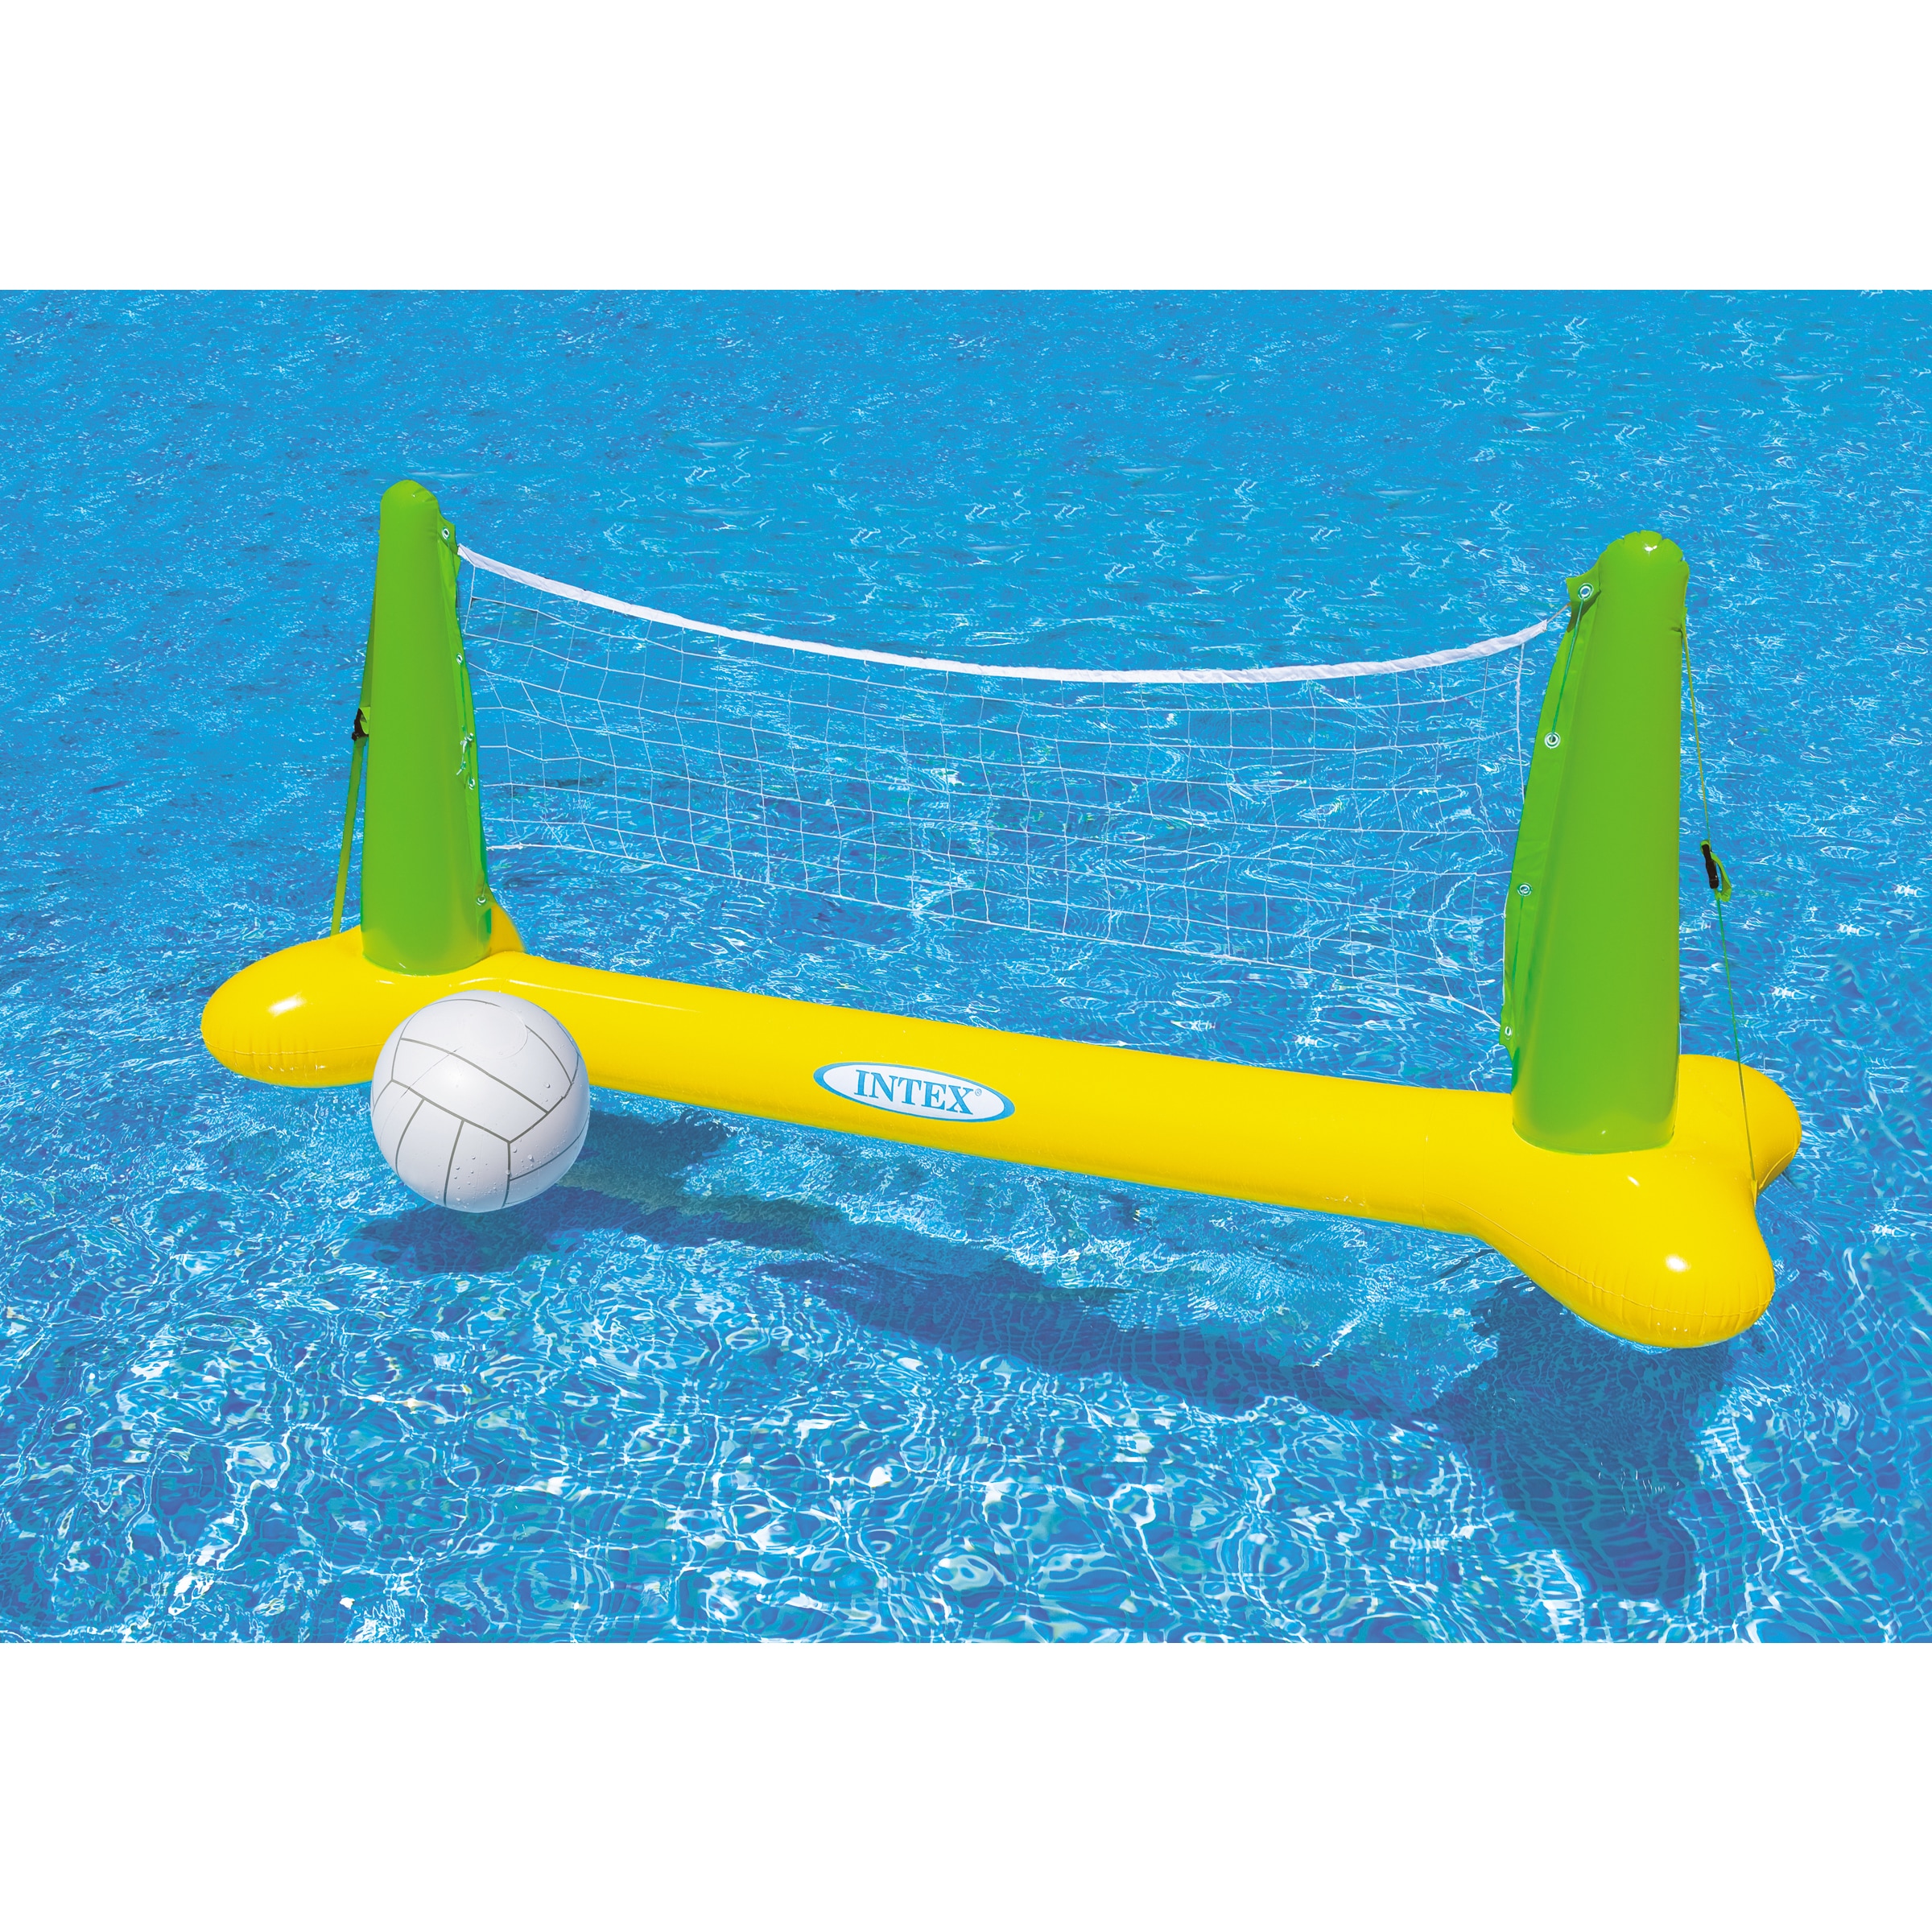 iBaseToy Inflatable Pool Volleyball Game Set with Adjustable Net and 2 Balls 118/”x25.59/”x33.46/” Floating Water Volleyball Game Swimming Pool Toy for Adults and Kids Easy to Inflate and Deflate